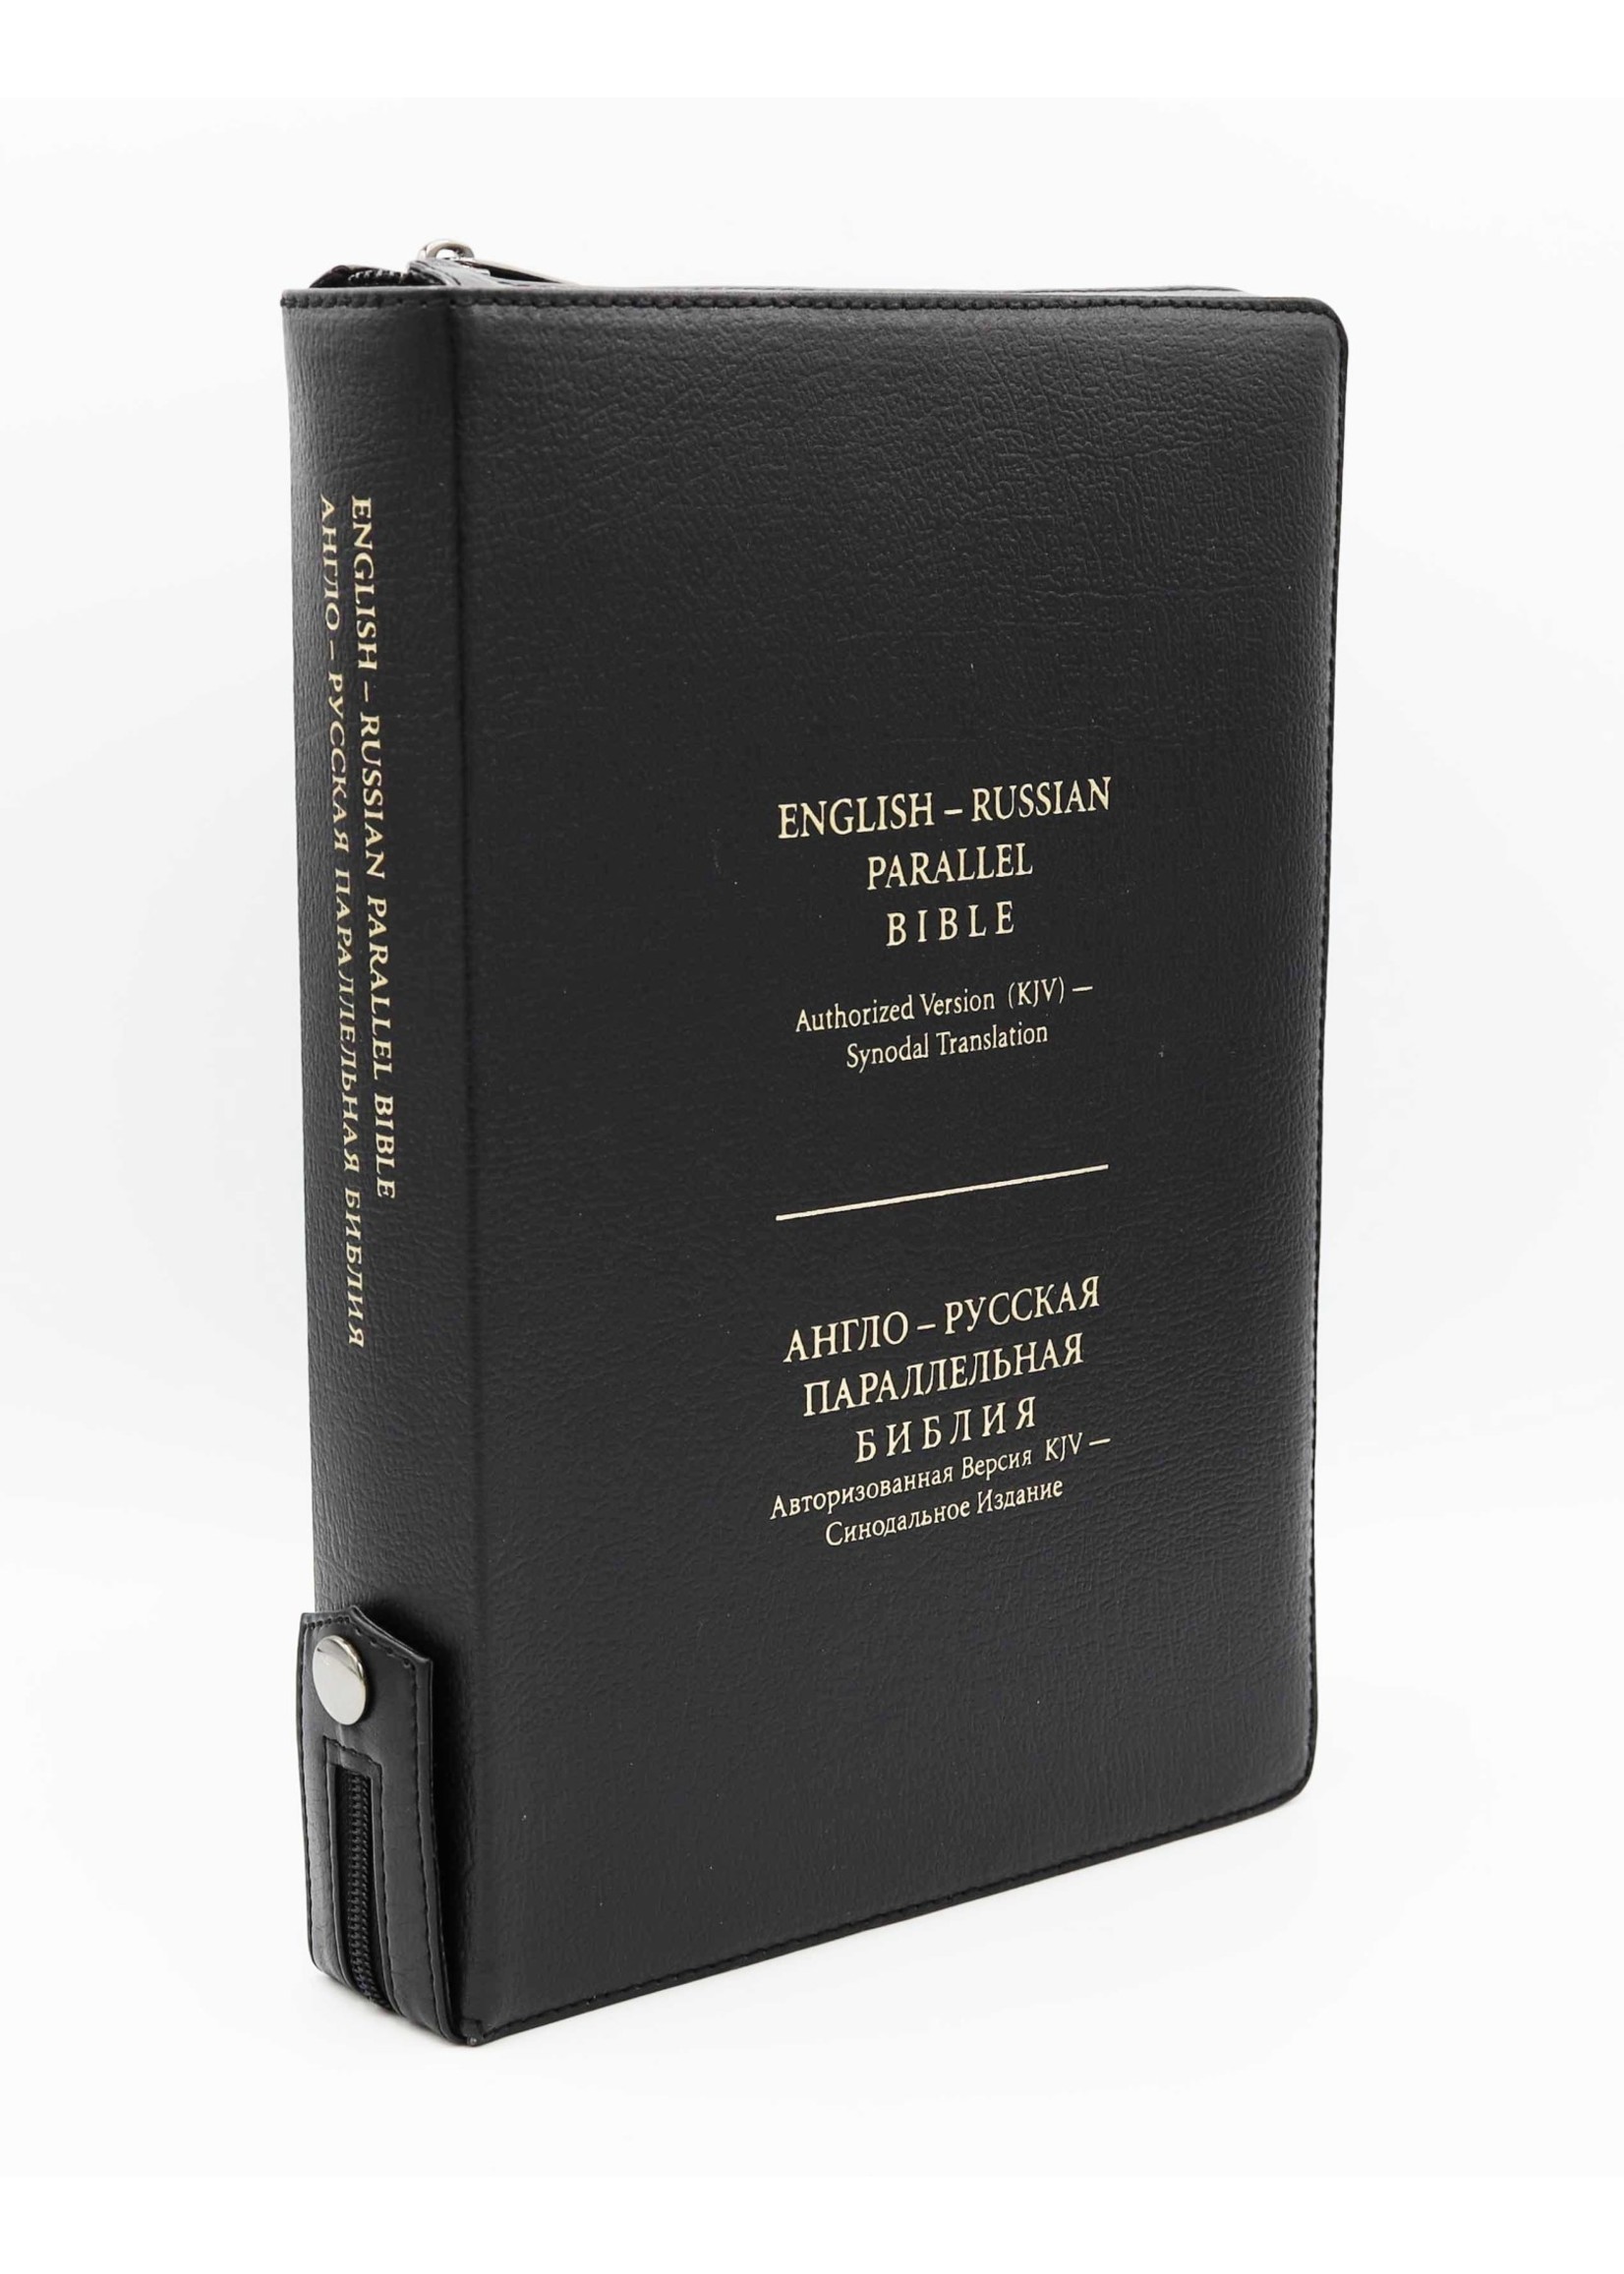 English-Russian Parallel Bible (KJV-SYNO), Index, Zipper, Large, Bonded Leather Black